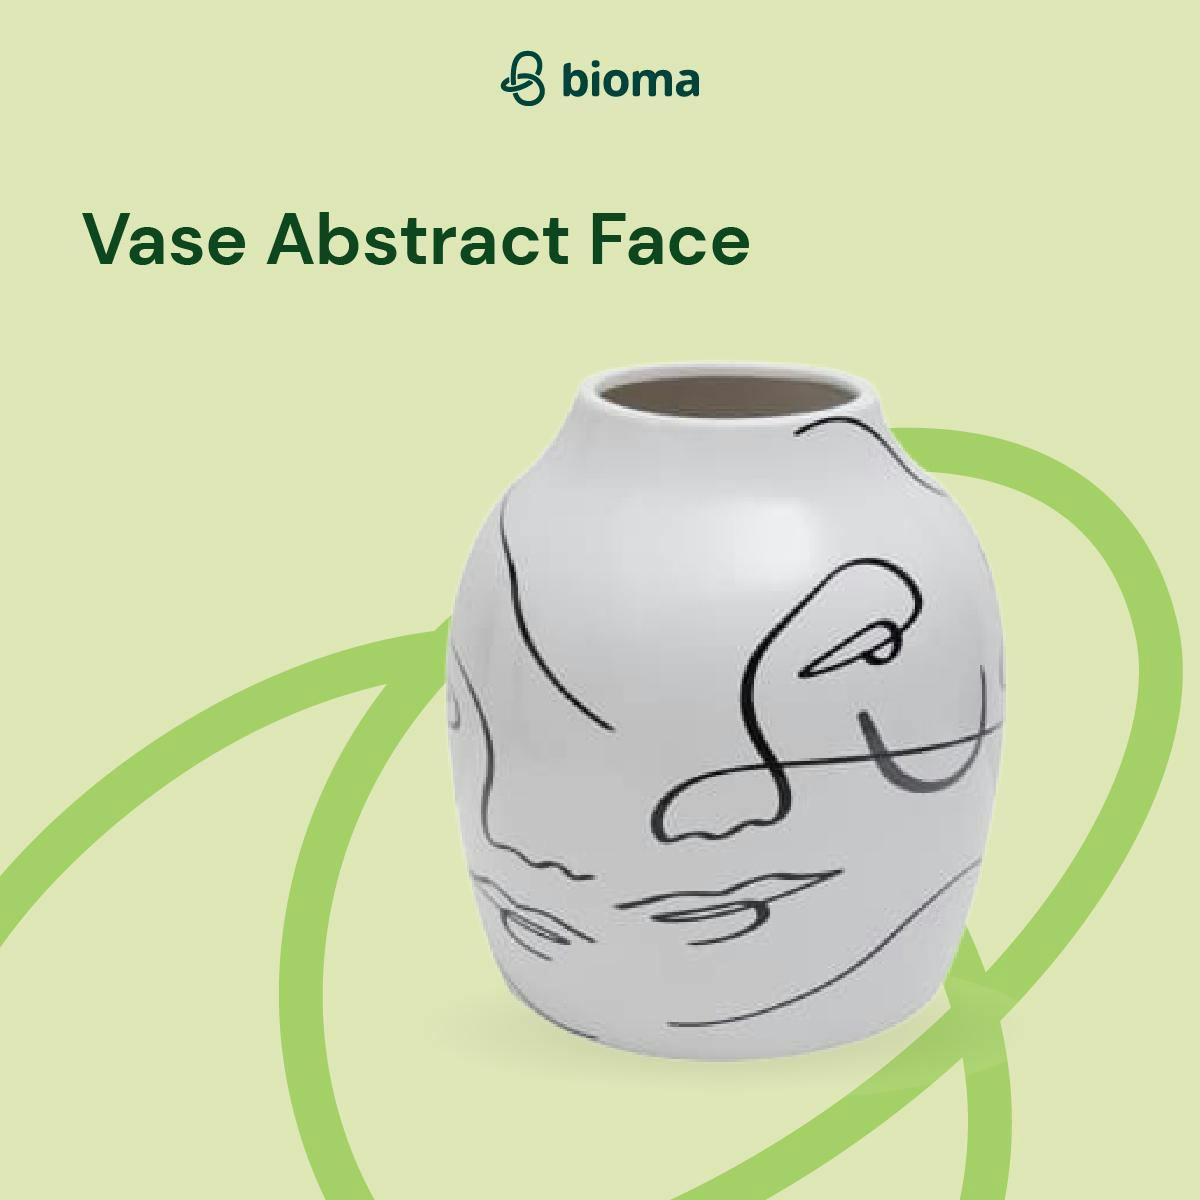 Image 436 Vase Abstract Face A1